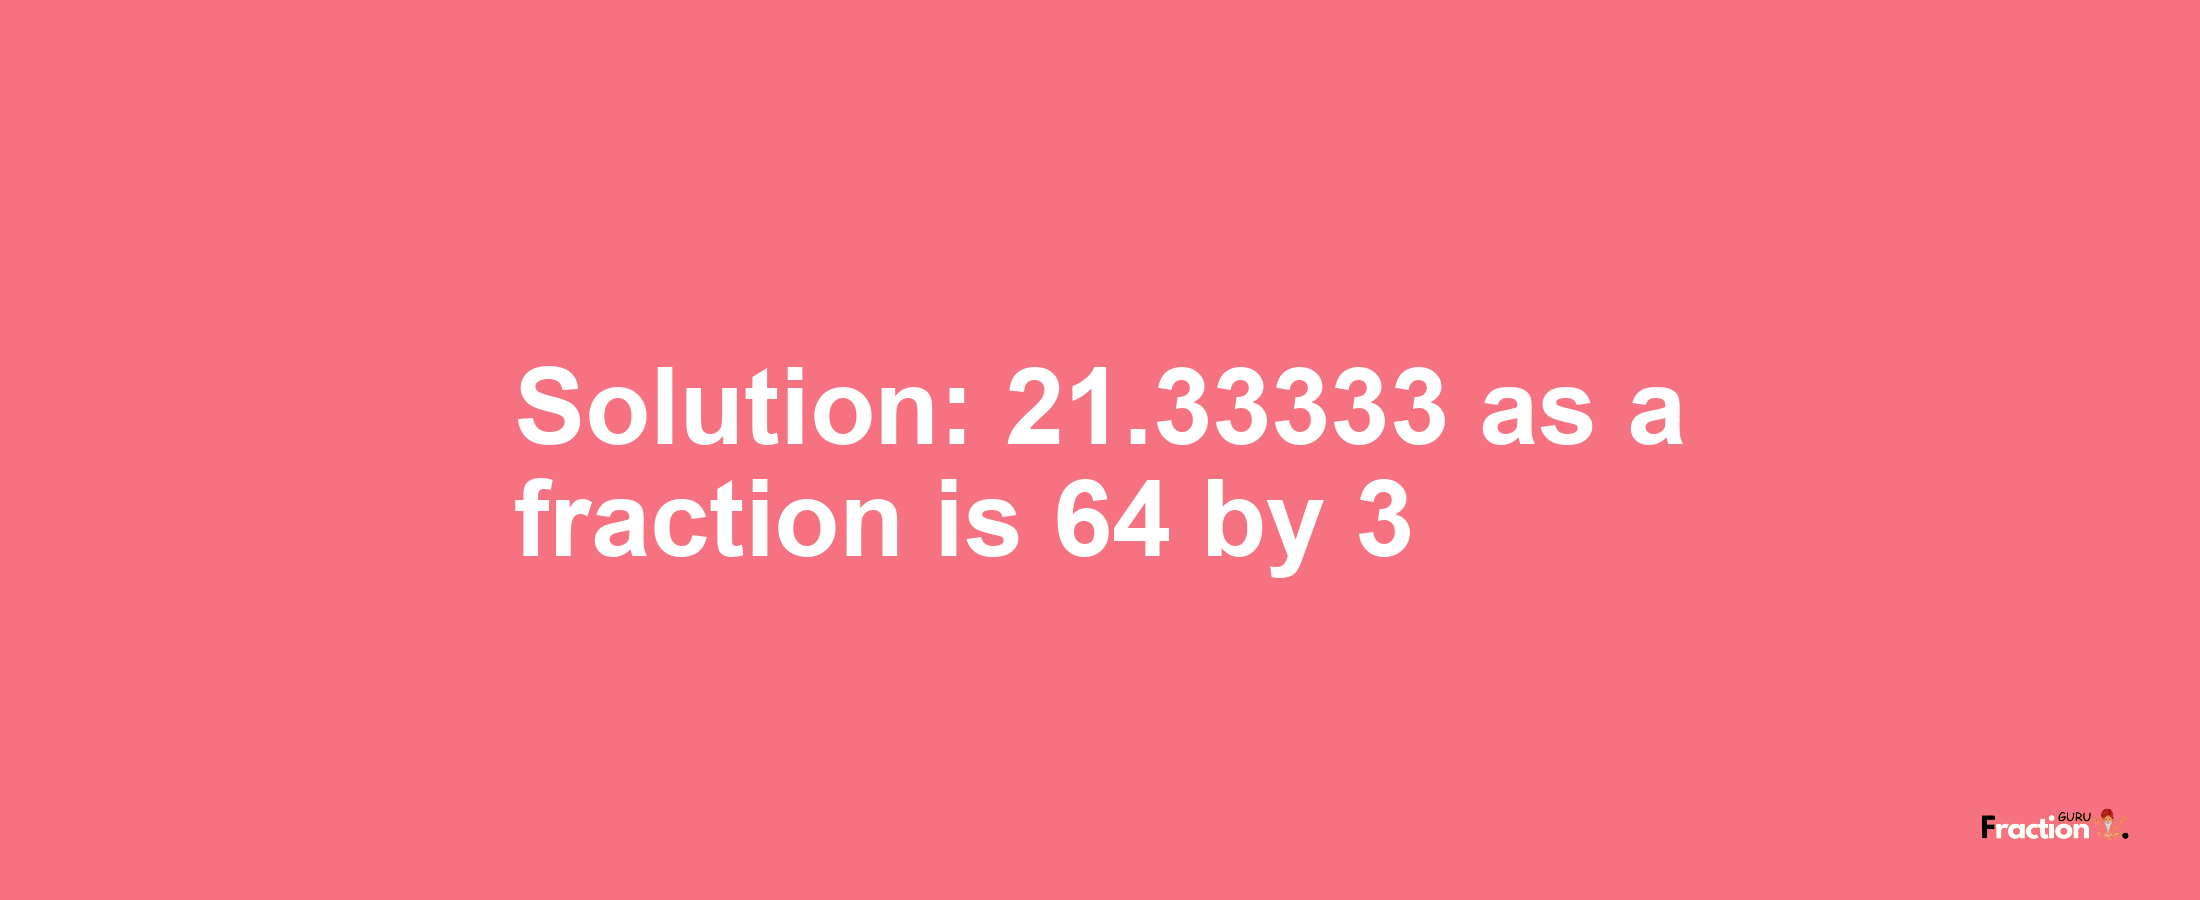 Solution:21.33333 as a fraction is 64/3